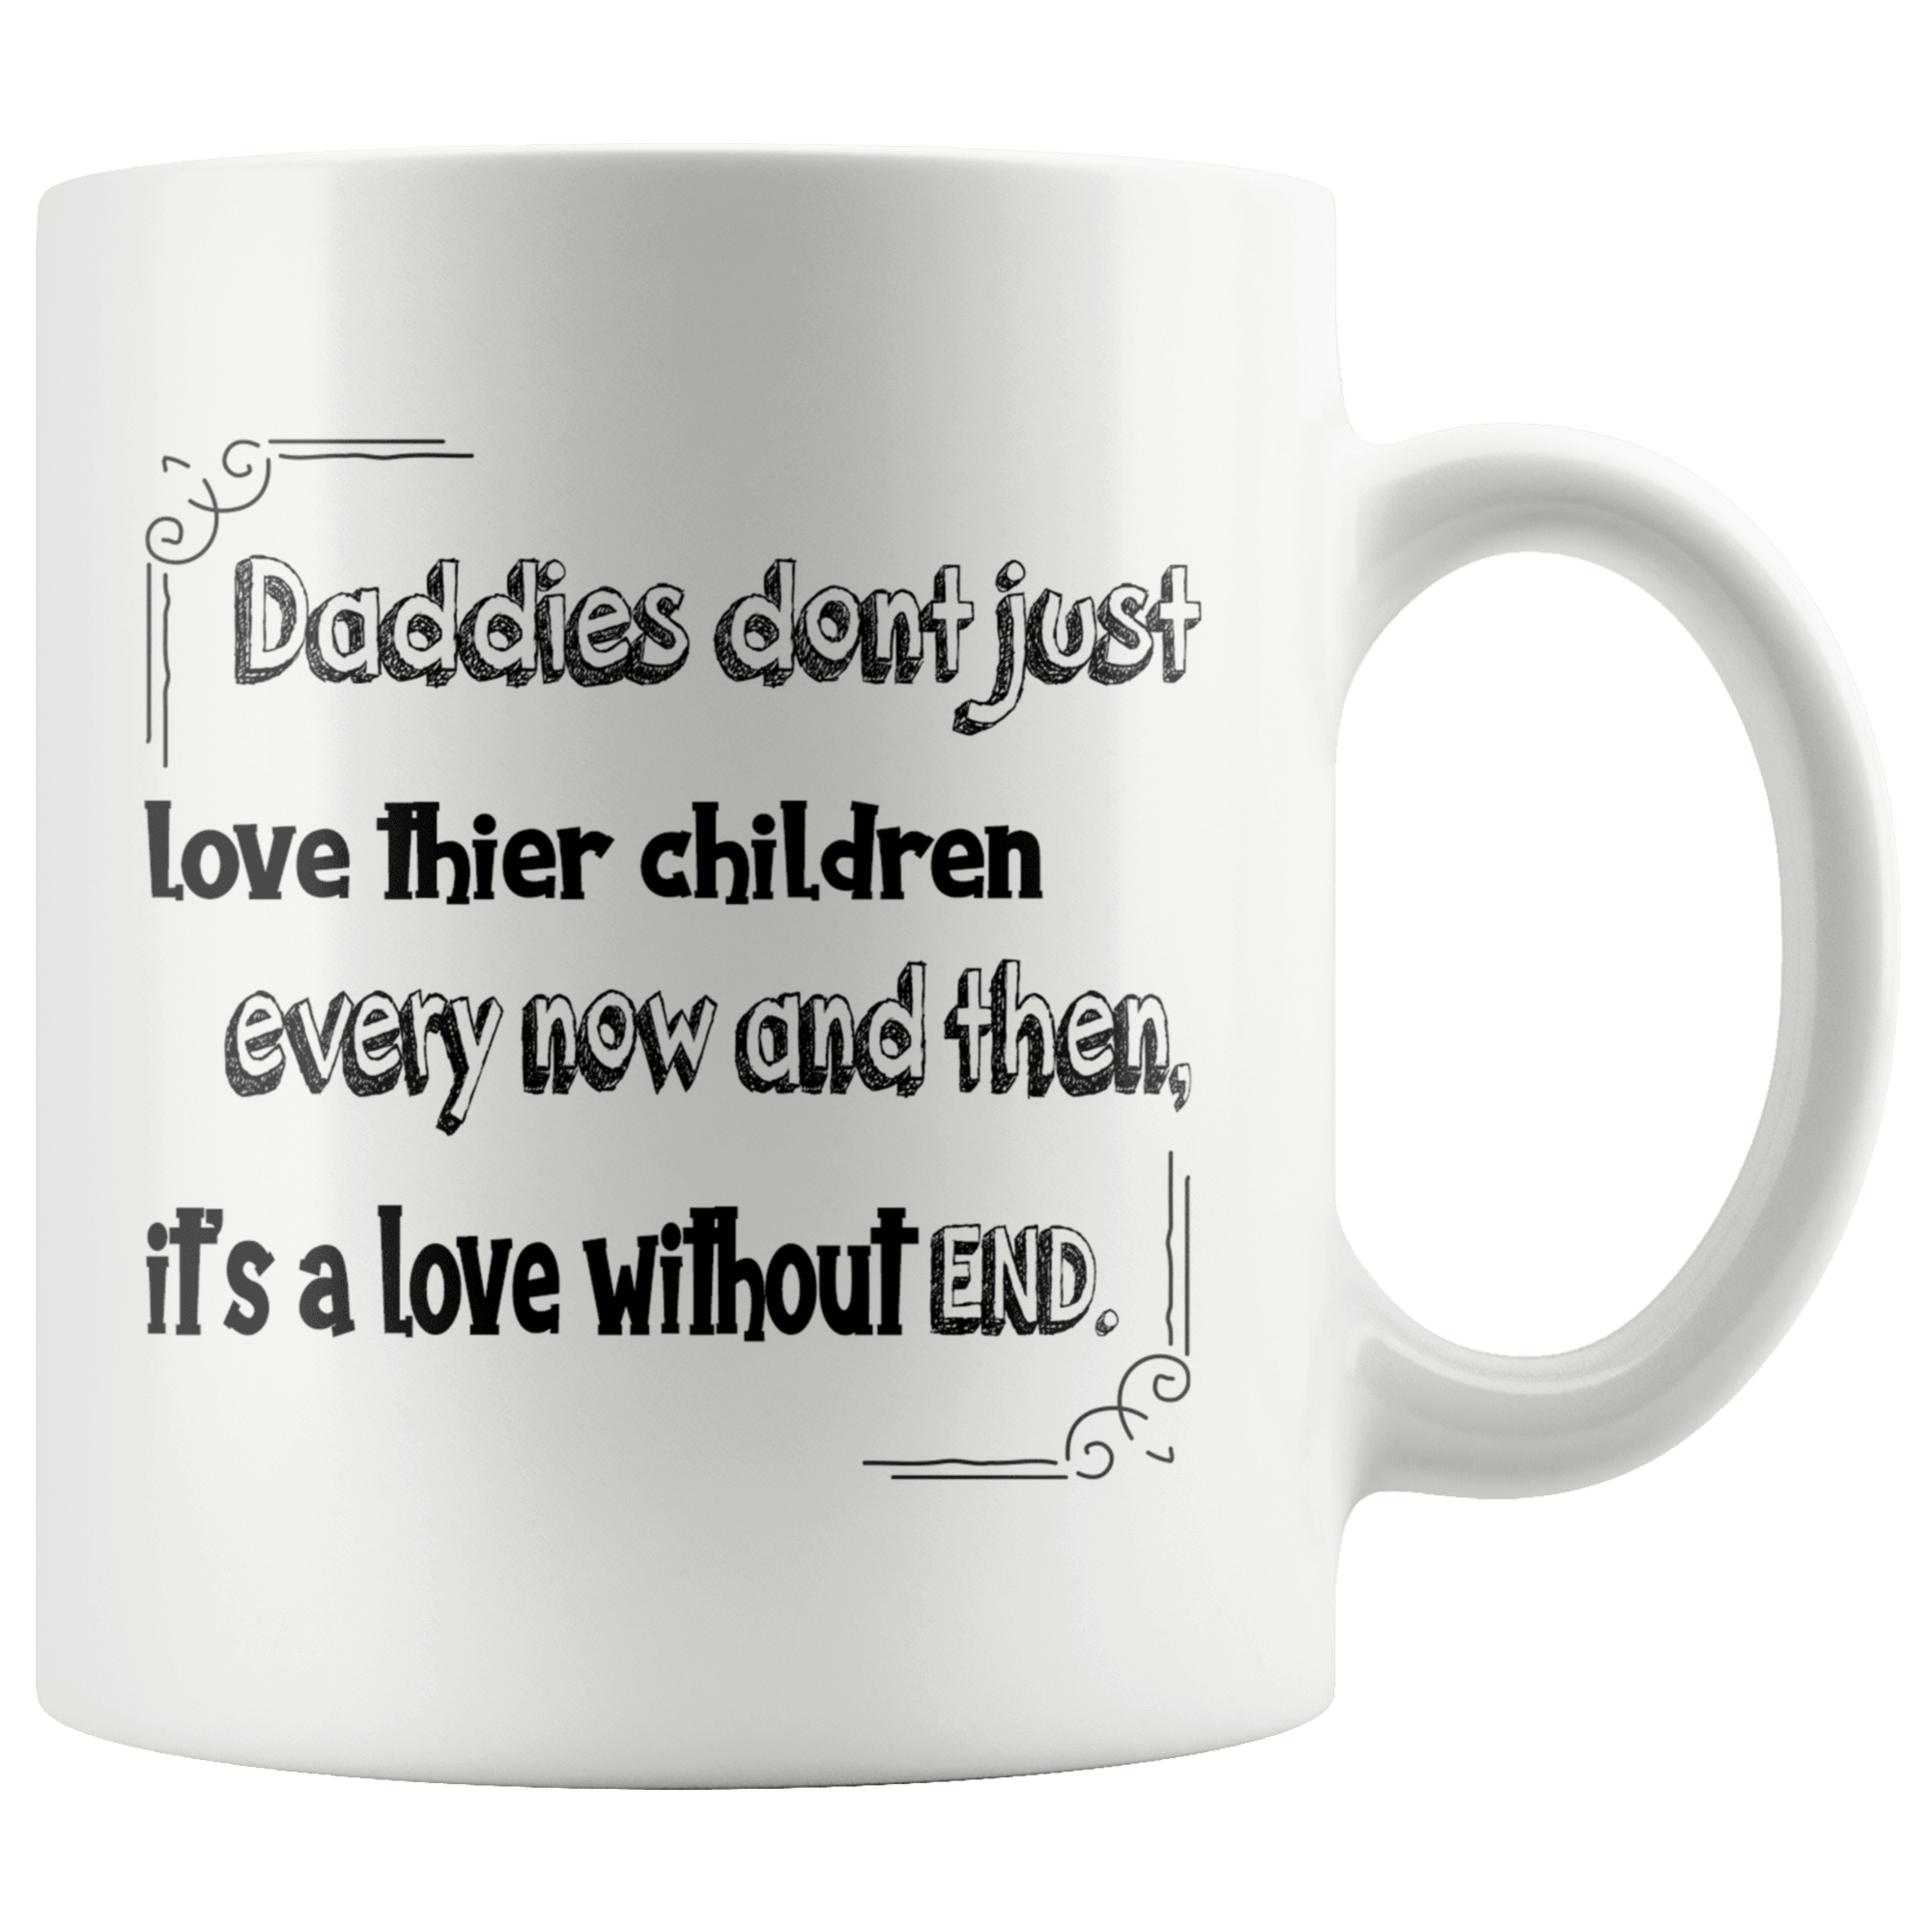 Great Coffee Mug For Father - Daddies Don't Just Love Their Children Every Now And Then, It's A Love Without End. - SPCM